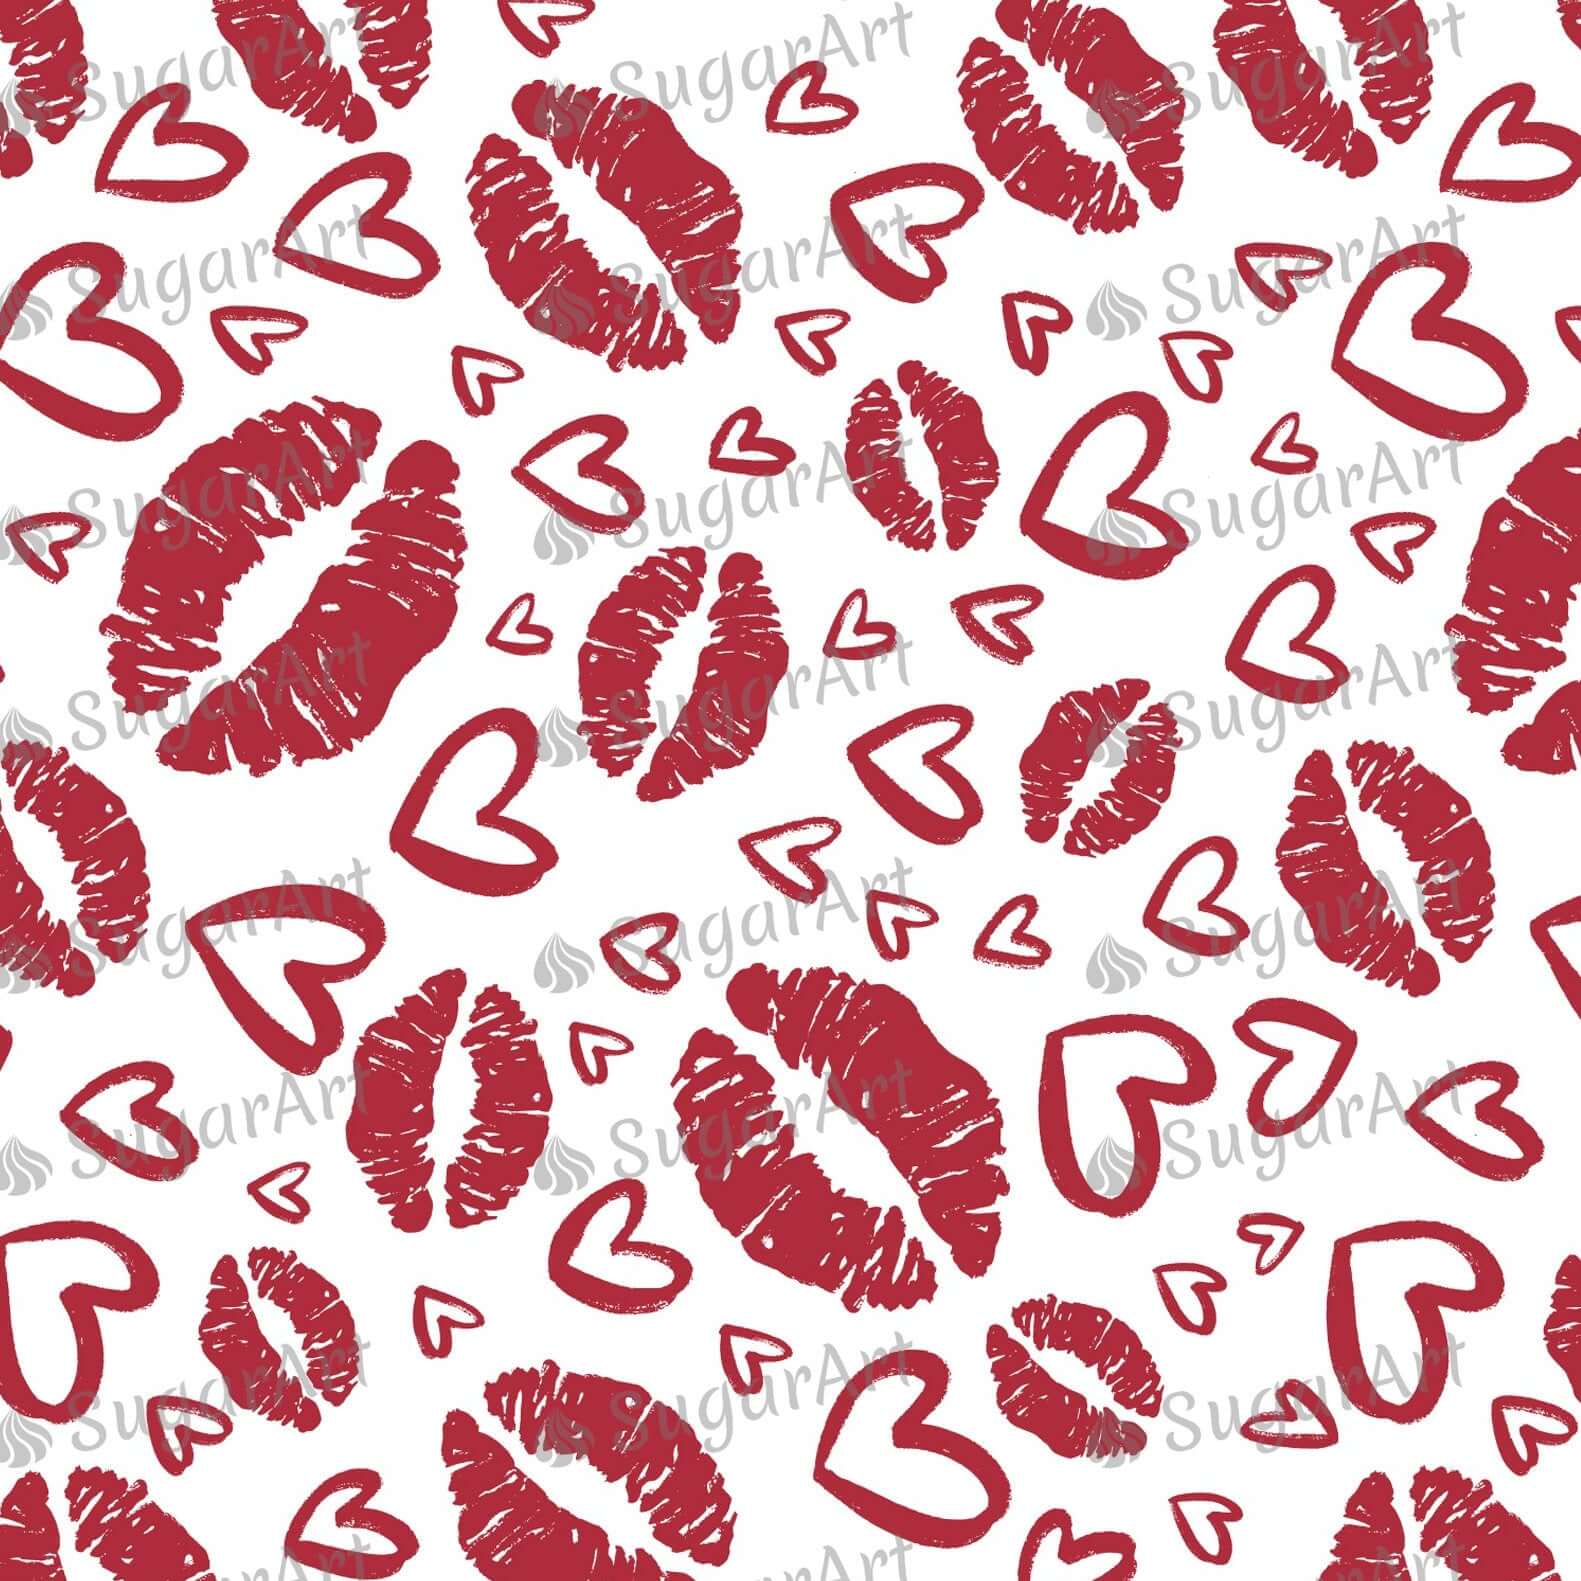 Red Kisses and Hearts - BSA083.